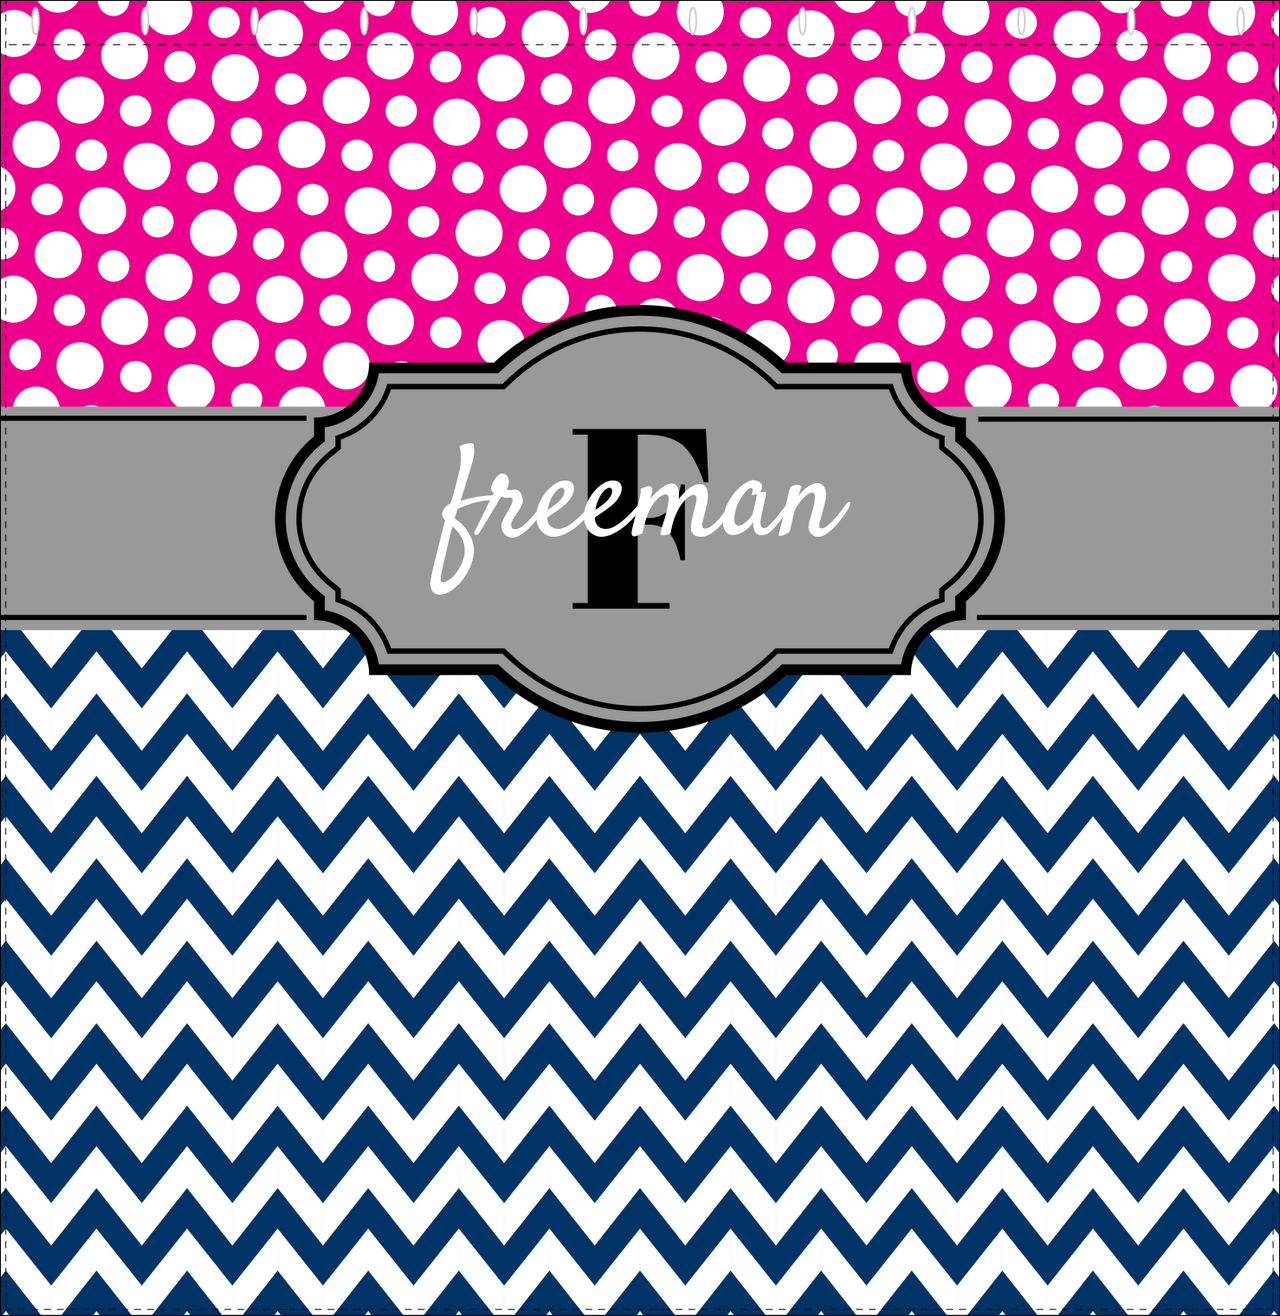 Personalized Polka Dots and Chevron I Shower Curtain - Pink and Navy - Fancy Nameplate - Decorate View